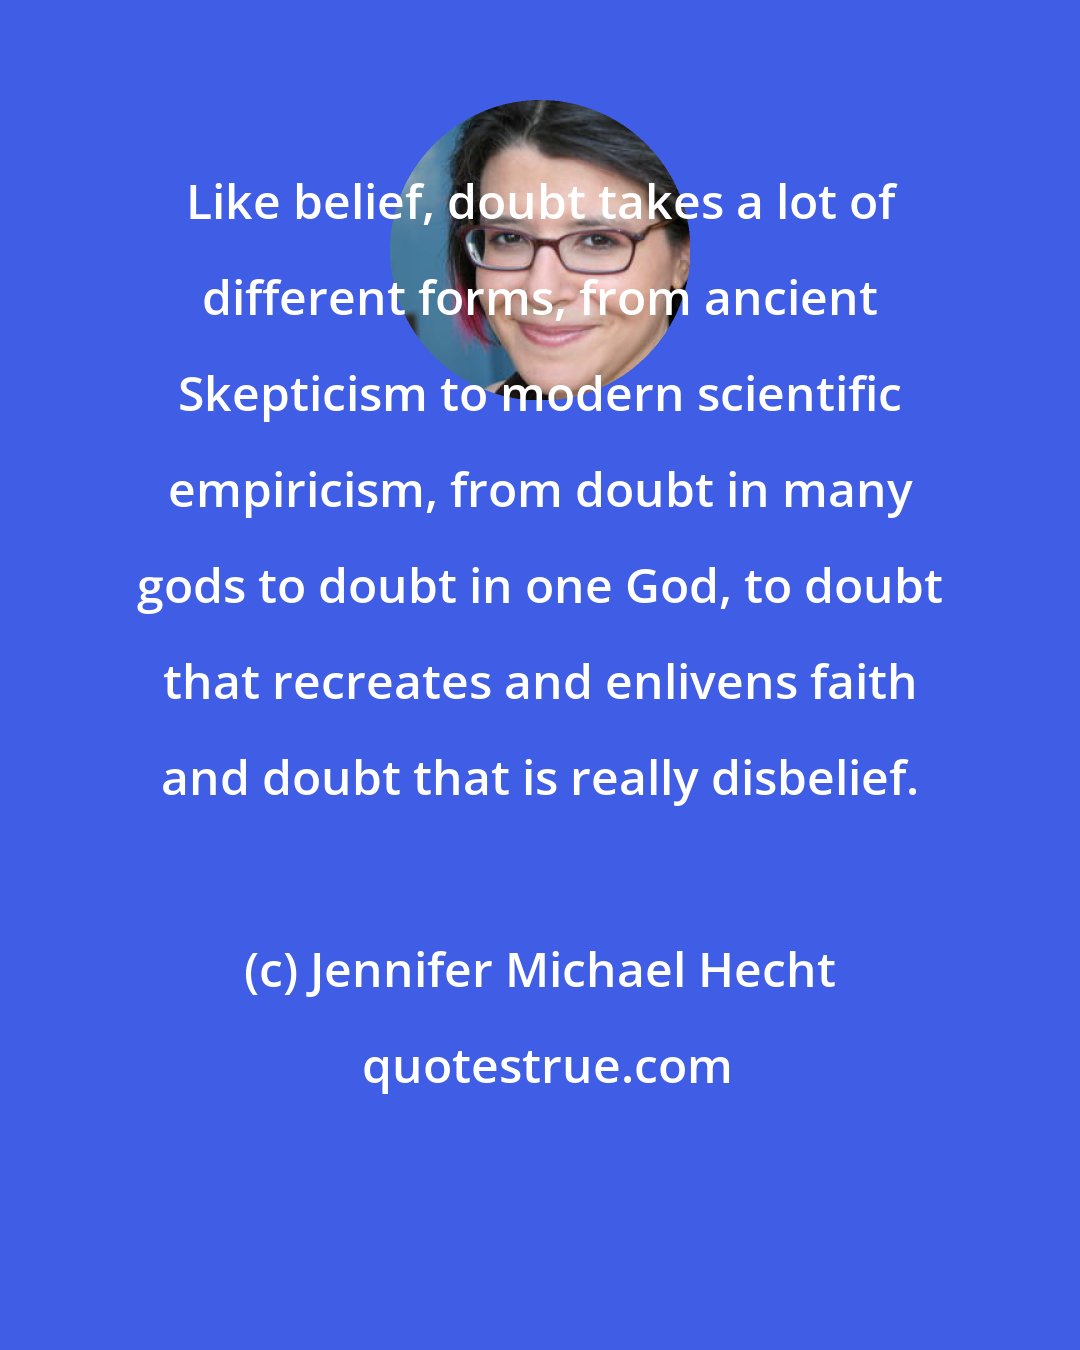 Jennifer Michael Hecht: Like belief, doubt takes a lot of different forms, from ancient Skepticism to modern scientific empiricism, from doubt in many gods to doubt in one God, to doubt that recreates and enlivens faith and doubt that is really disbelief.